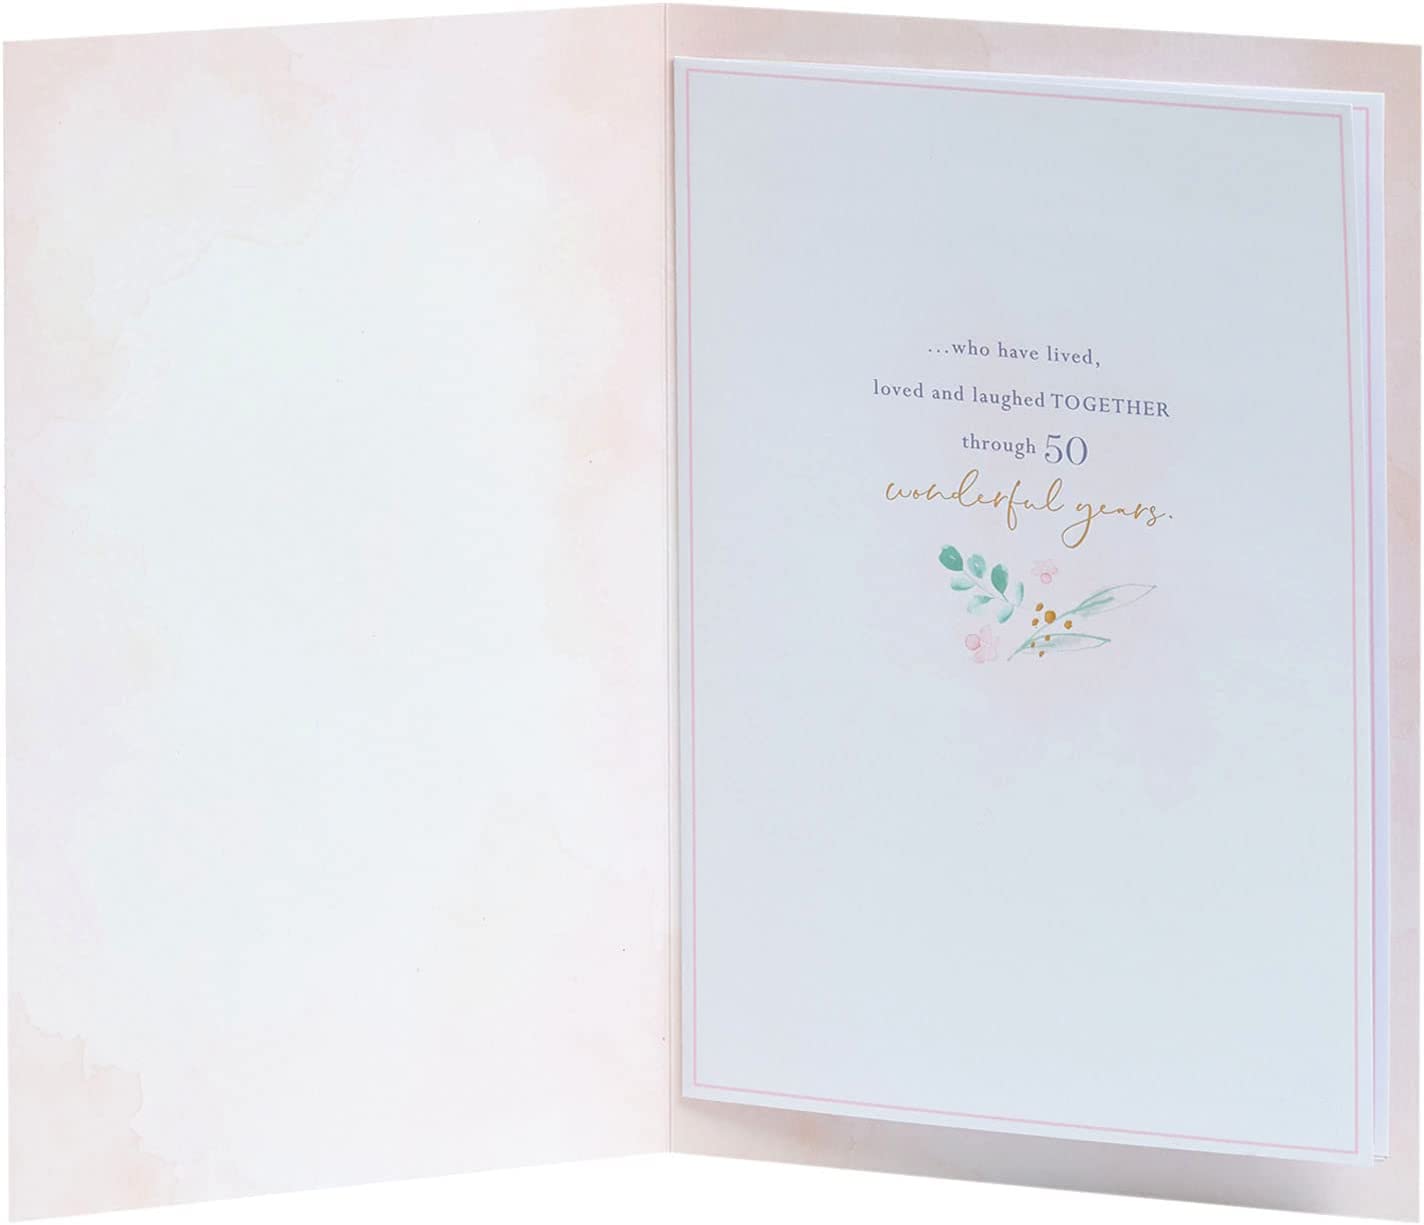 On Your 50th Golden Anniversary Large Exquisite Card for Mum and Dad